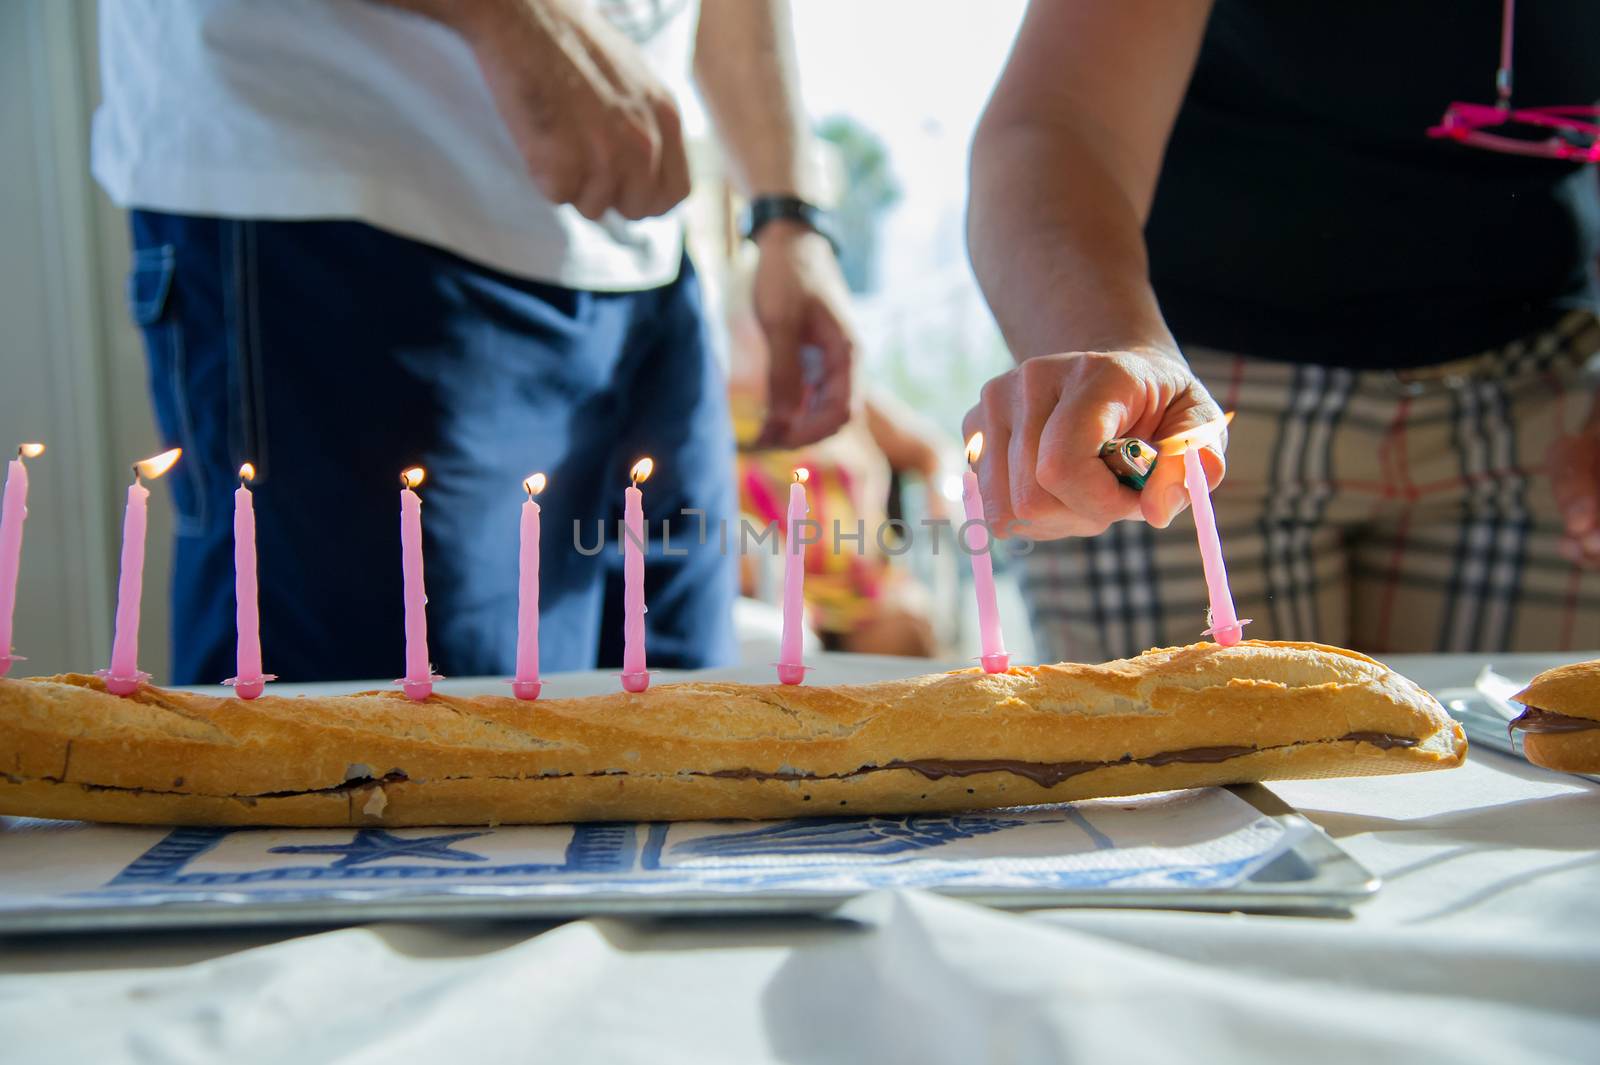 lighting of candles during a birthday